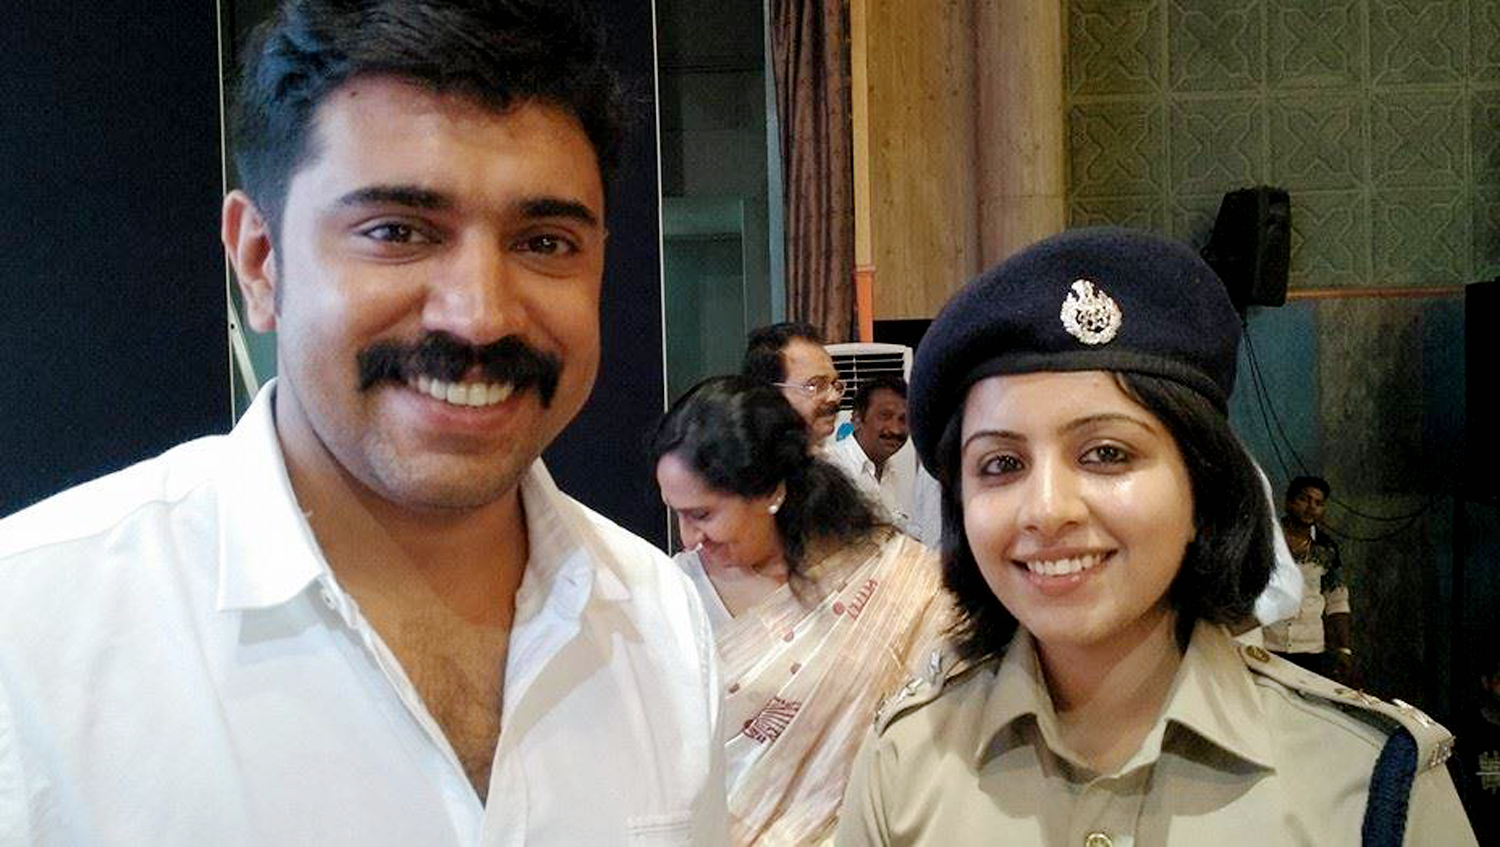 Picture with Nivin Pauly landed Merin Joseph in trouble